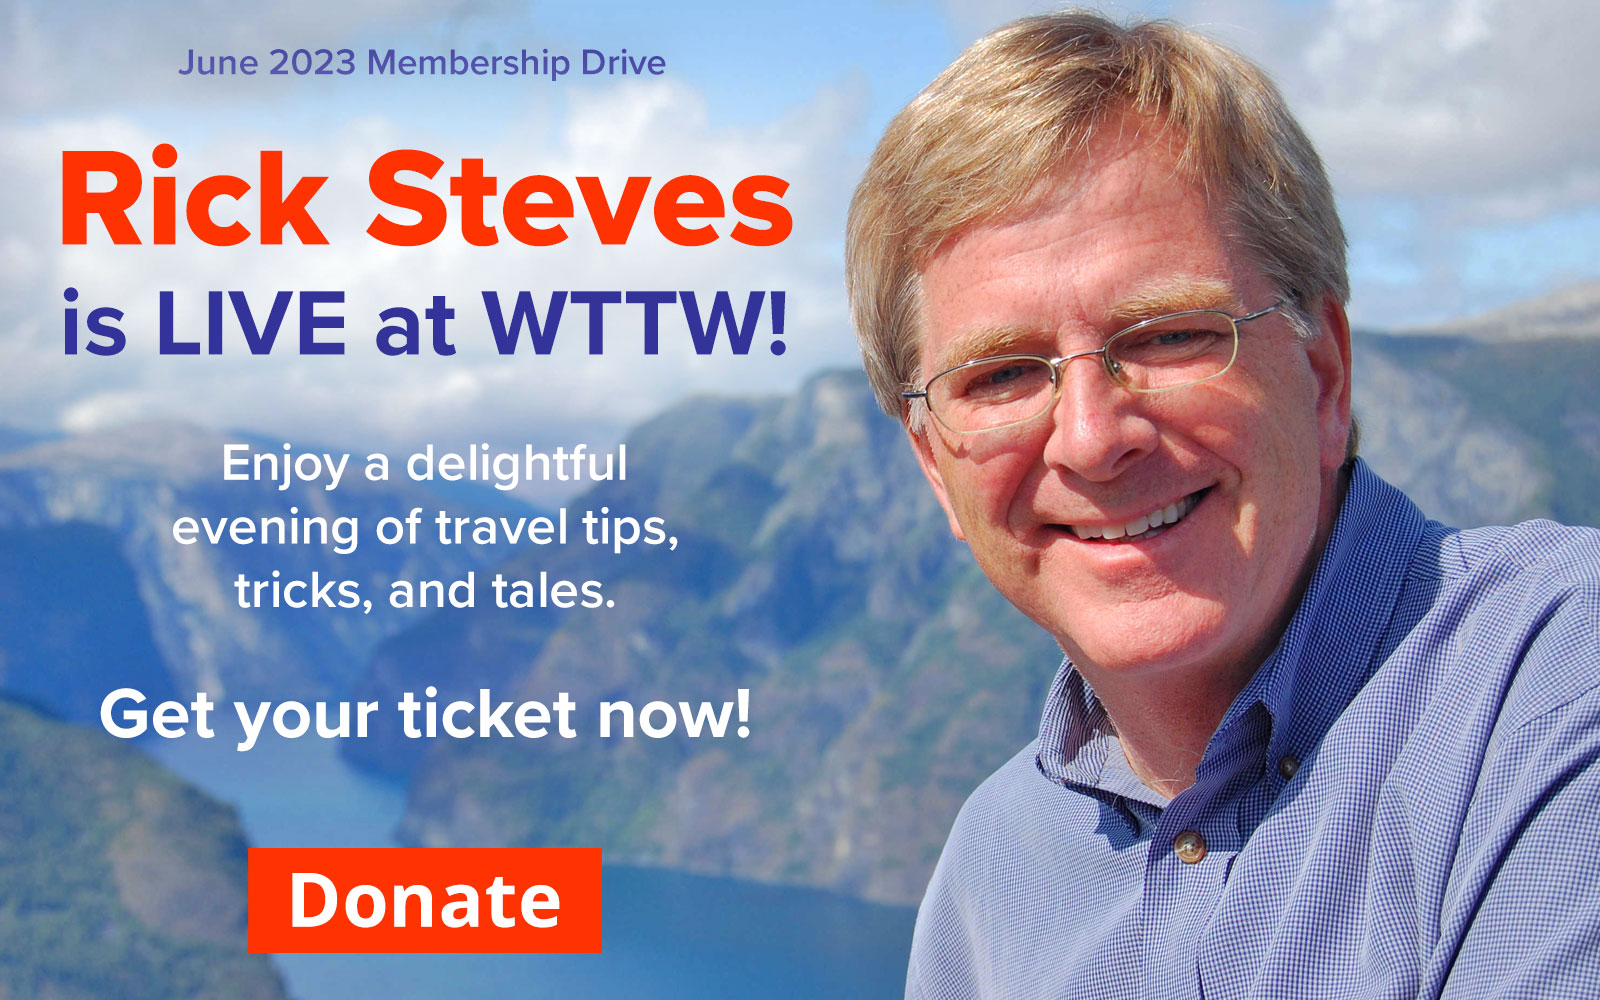 Get Tickets to see Rick Steves!